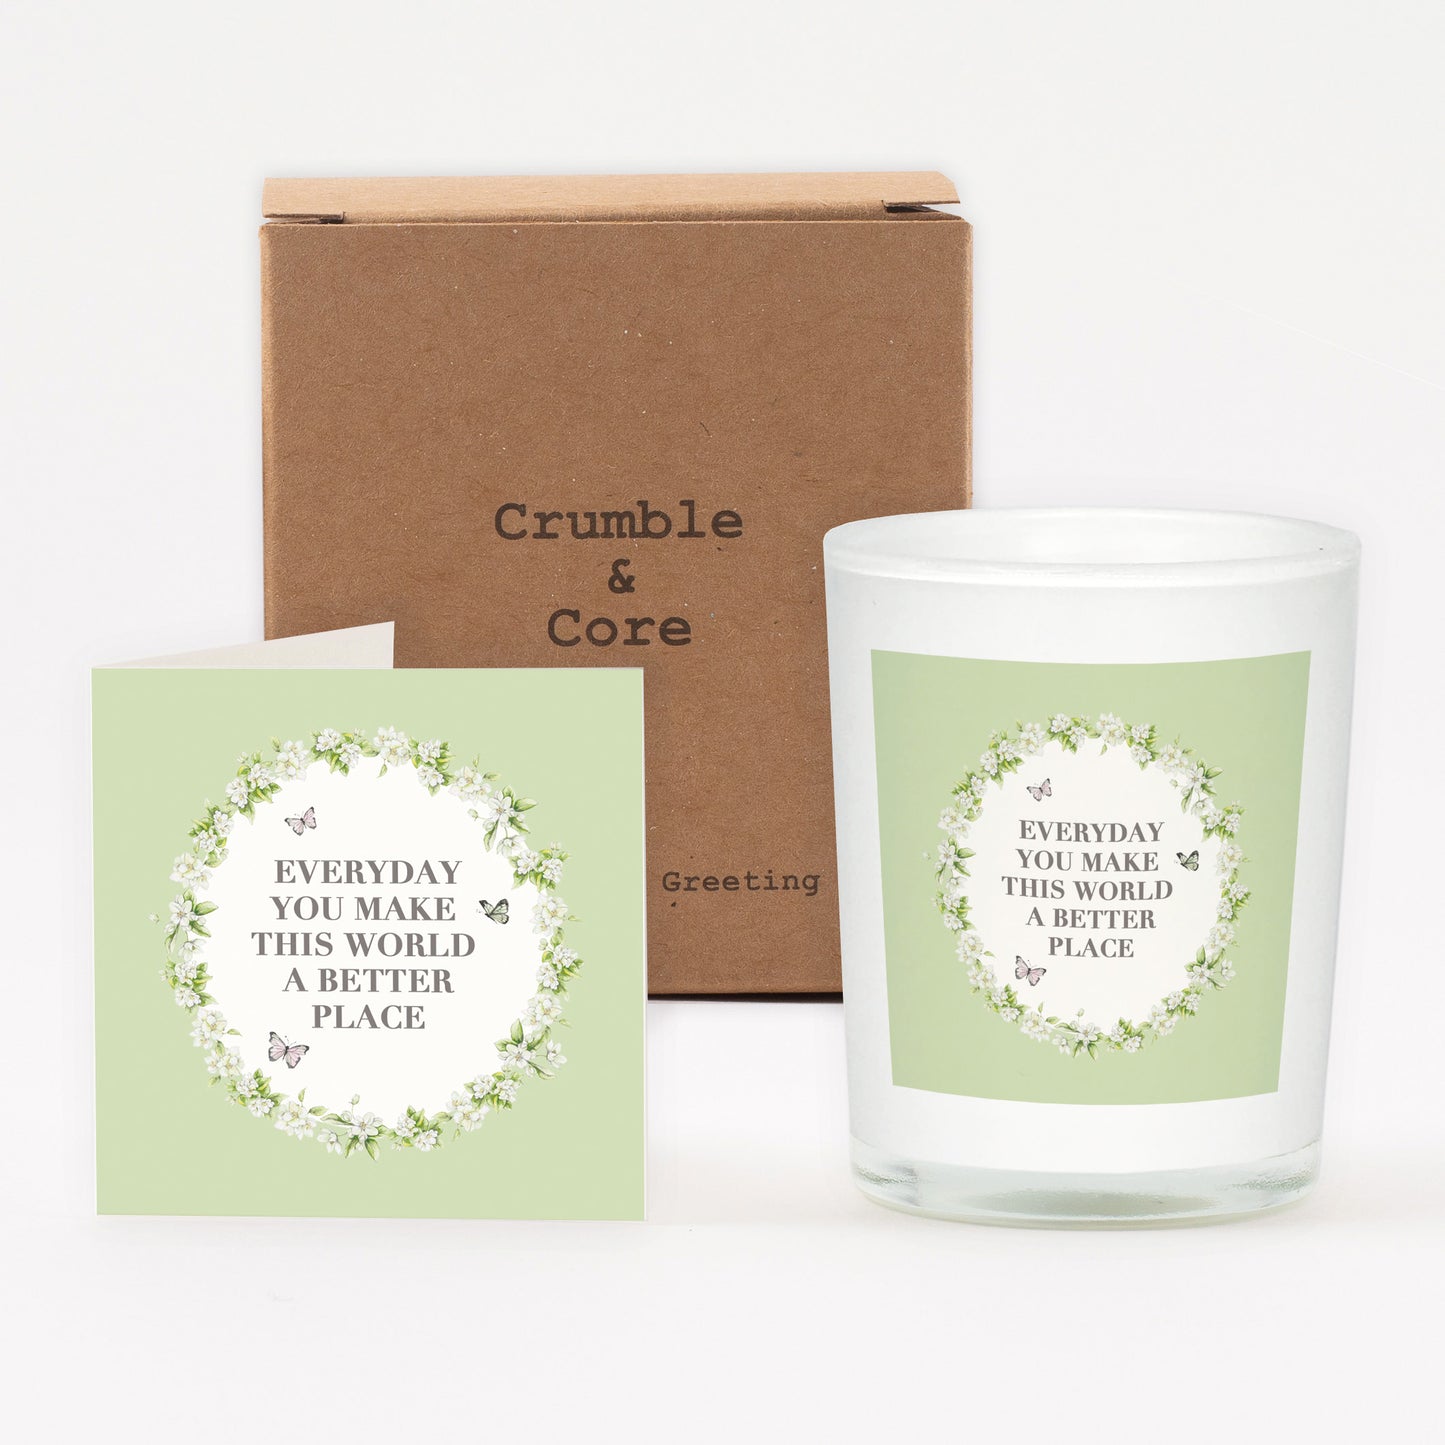 Vintage Sentiments Boxed Candle and Greeting Card You Make this World Candles Crumble and Core   